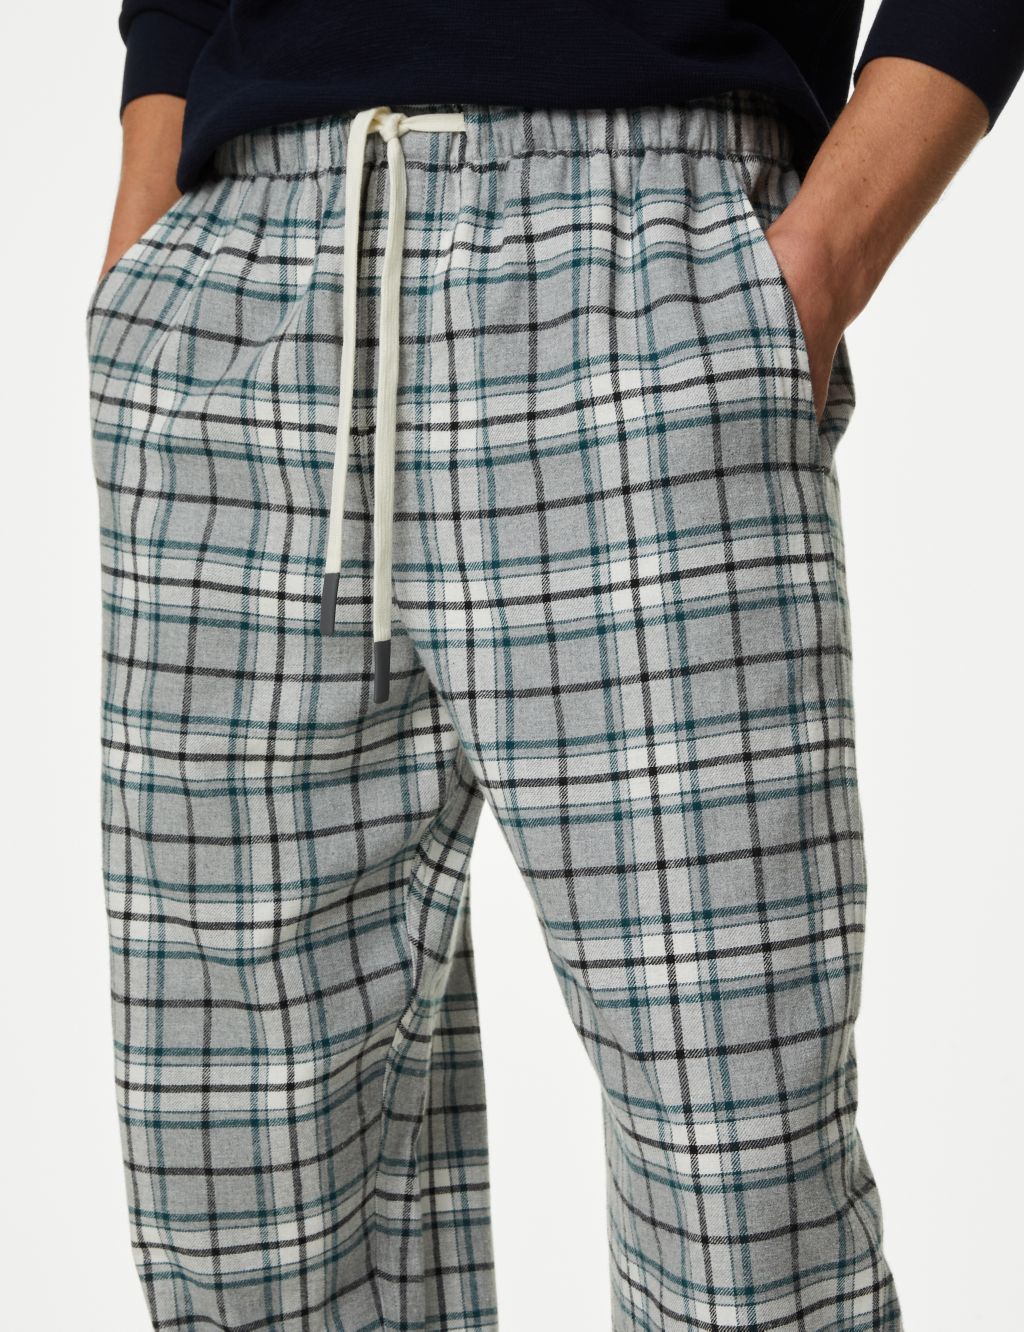 Brushed Cotton Checked Loungewear Bottoms image 4